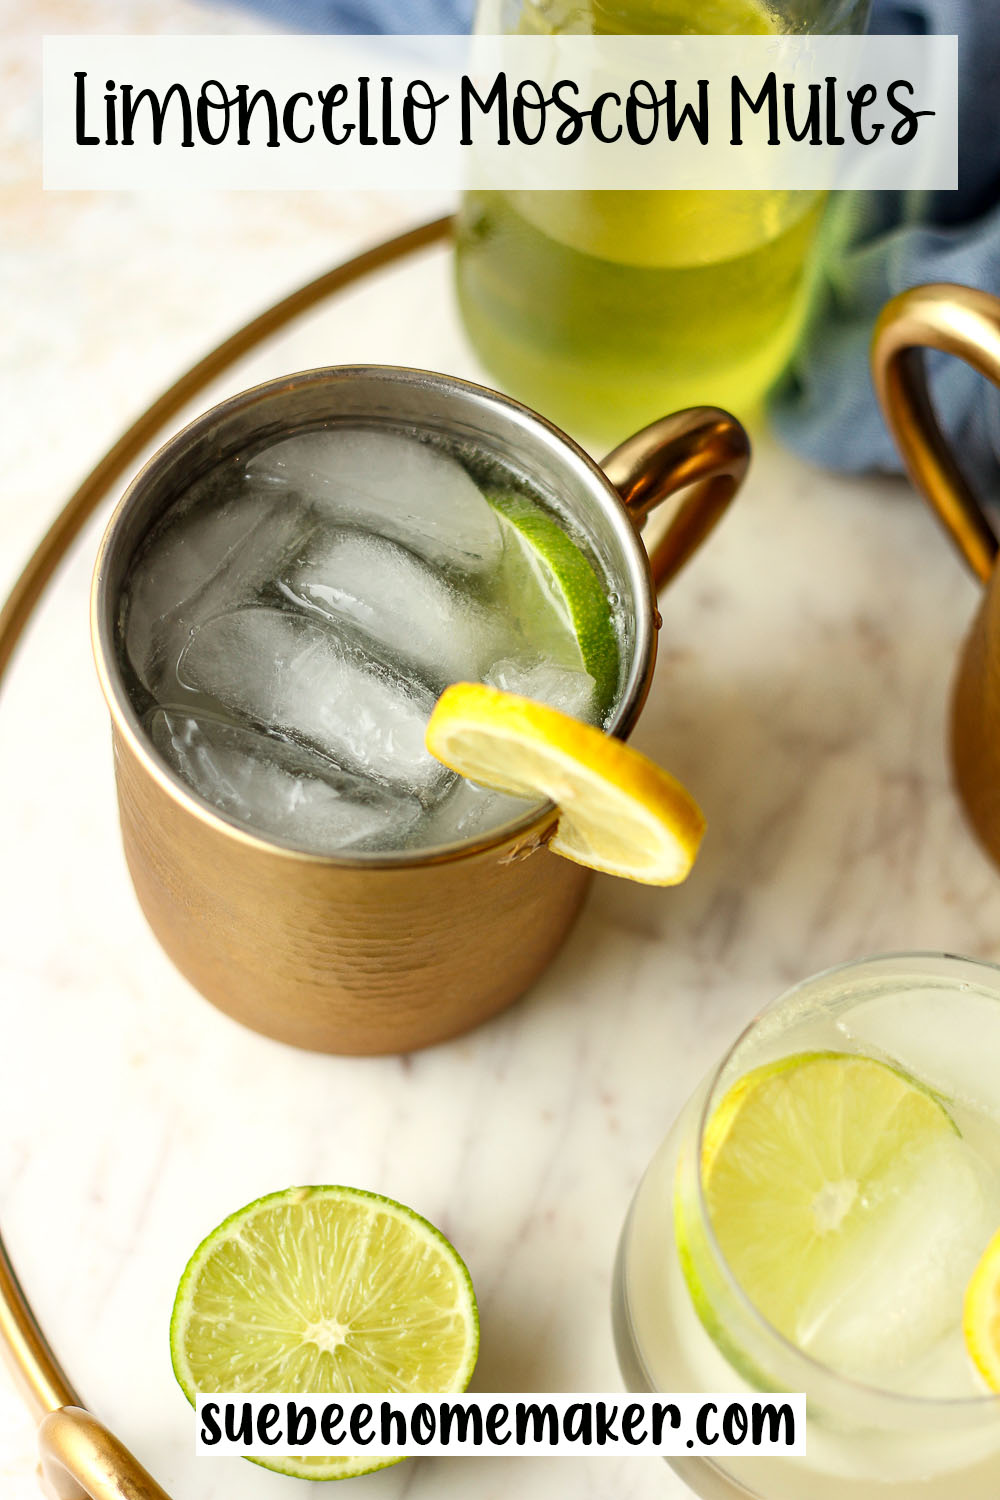 Overhead view of a copper mug of limoncello Moscow mules.